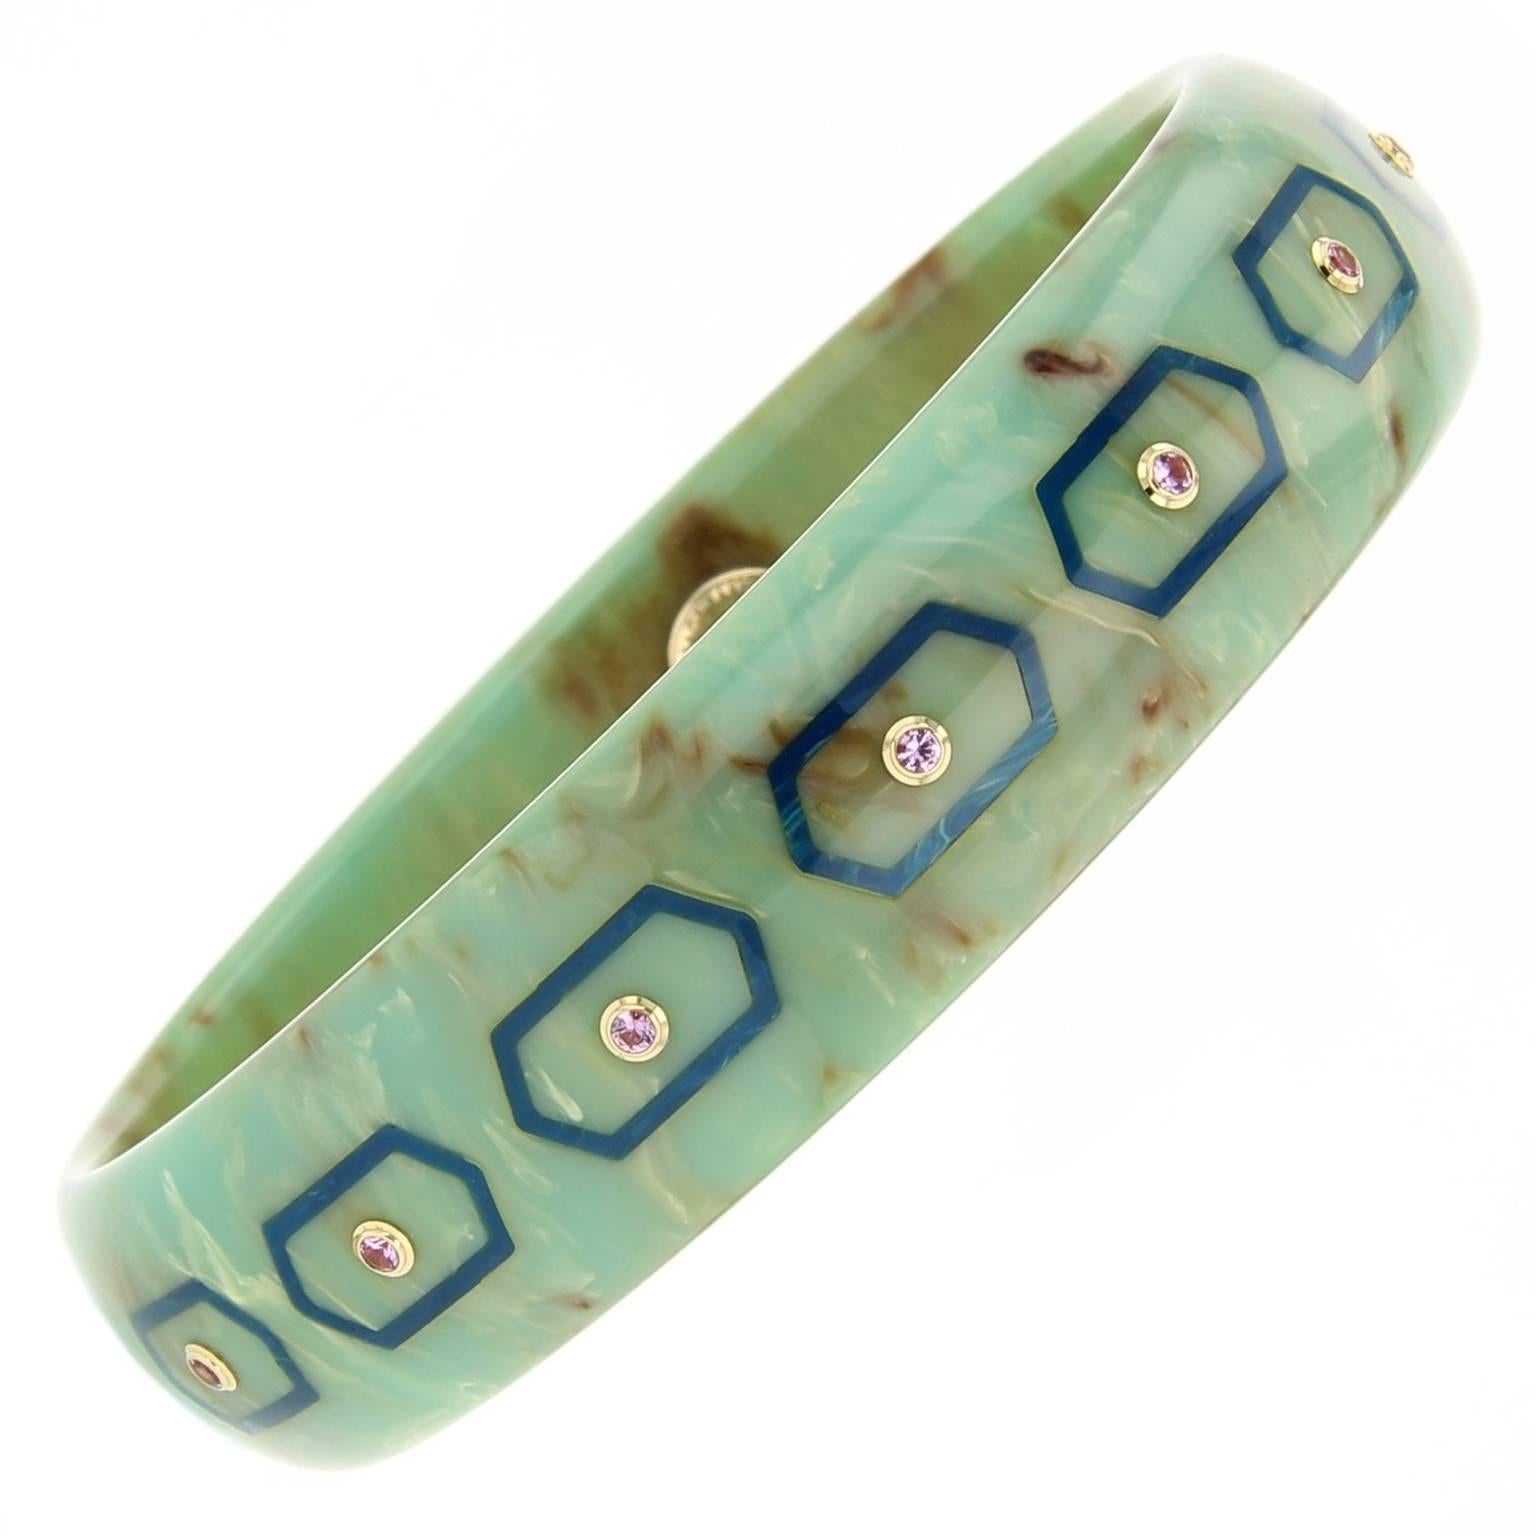 This Mark Davis bangle was handcrafted using marbled turquoise and blue  bakelite.  The bangle is elegantly detailed with elongated hexagonal inlay accented with pink sapphires set in 18k yellow gold bezels. 

Full details below:
• From the Mark